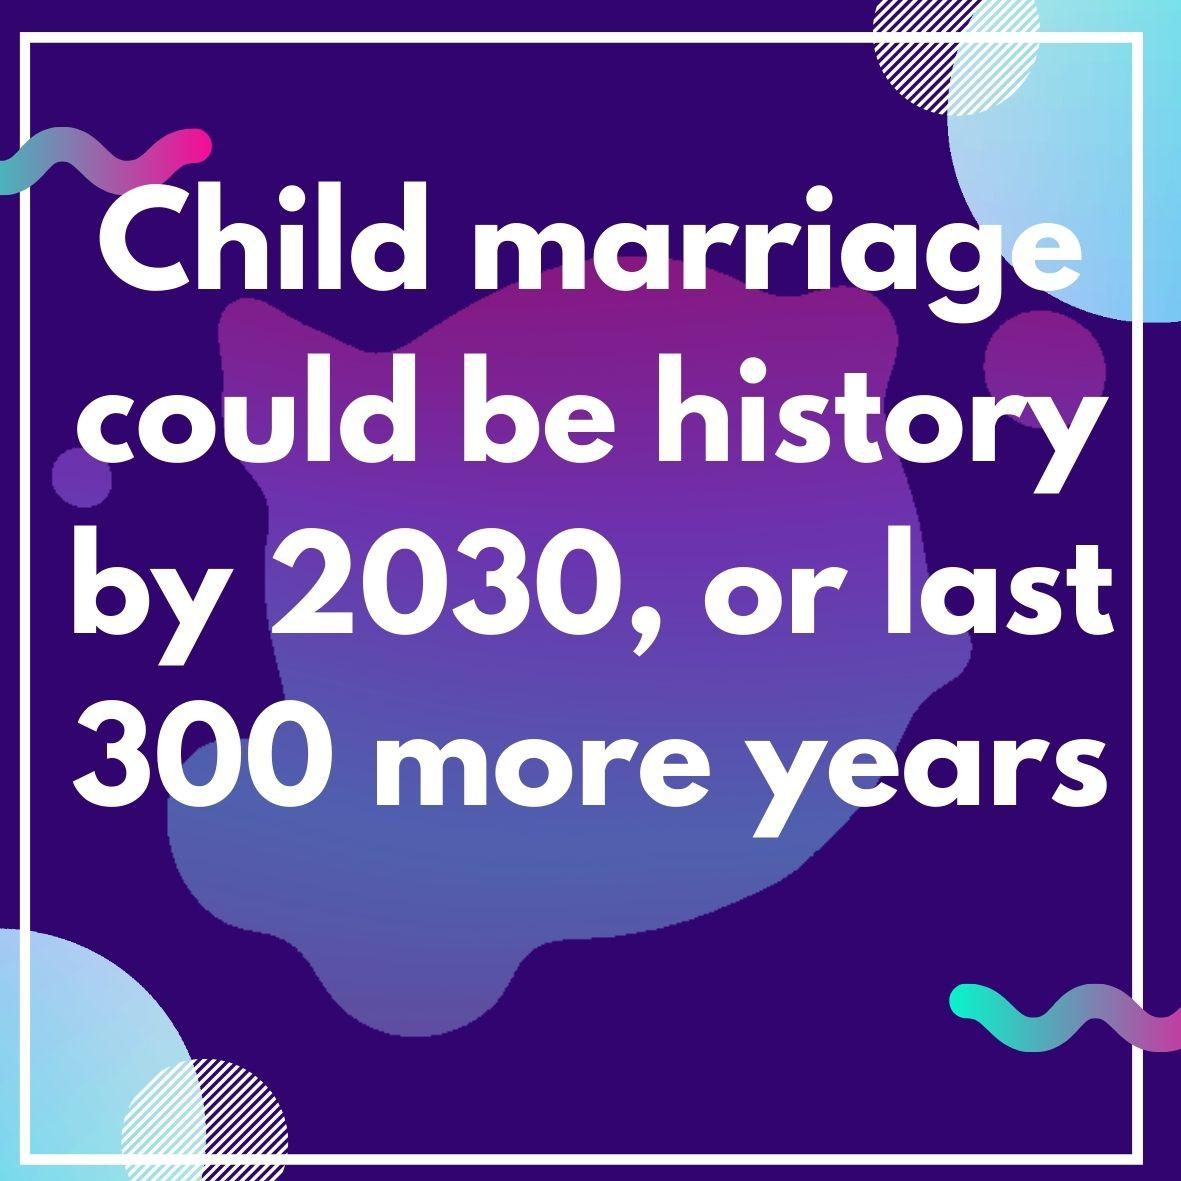 Child marriage could be history by 2030, or last 300 more years